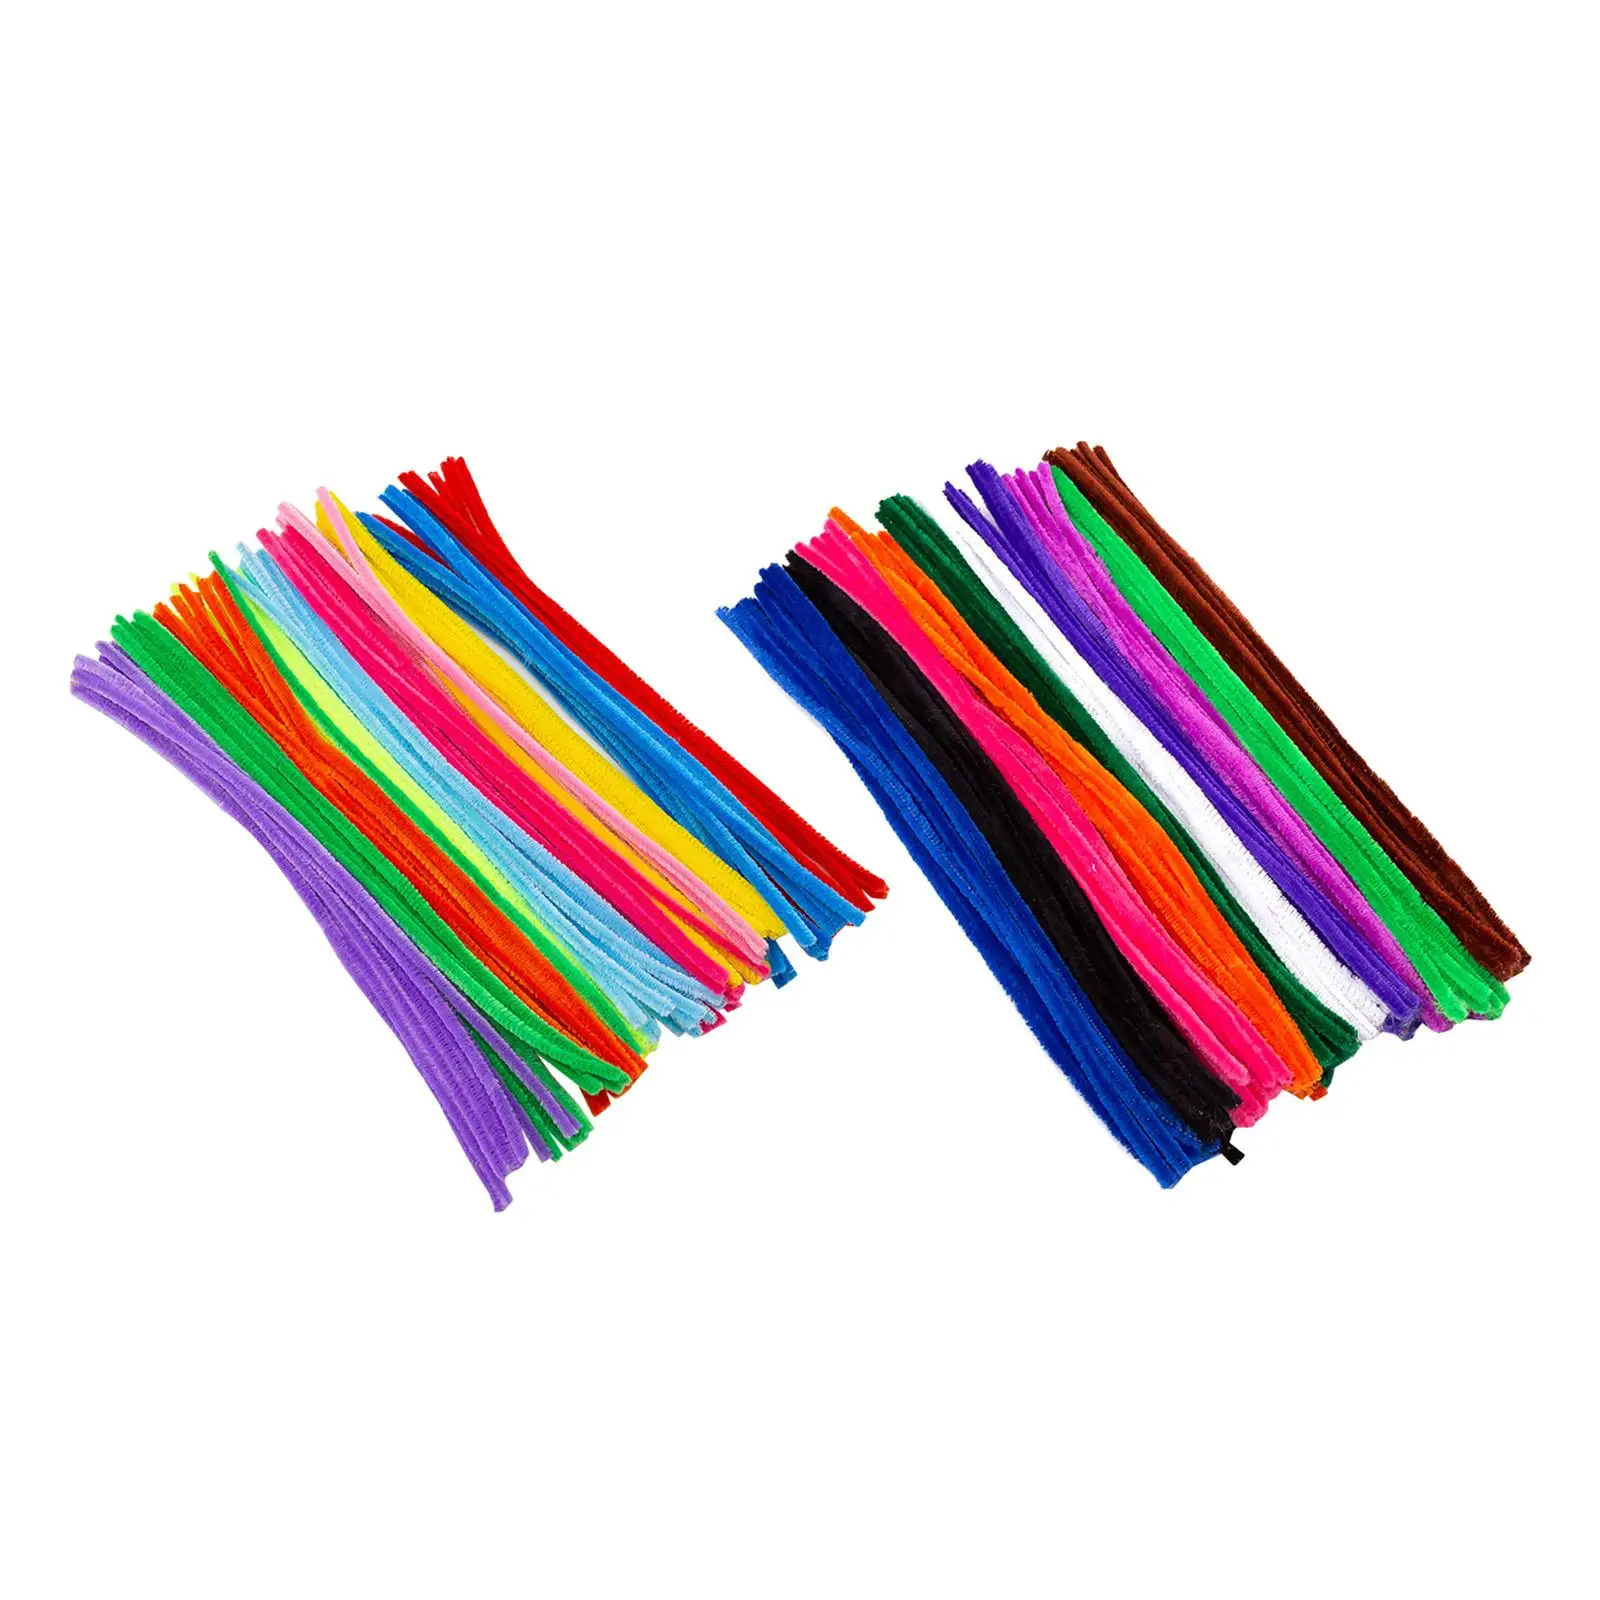 

Twisting Bar Decoration DIY Project Crafting Materials Handmade Assorted Colored Gifts Art Crafts Supplies for Preschool Parties